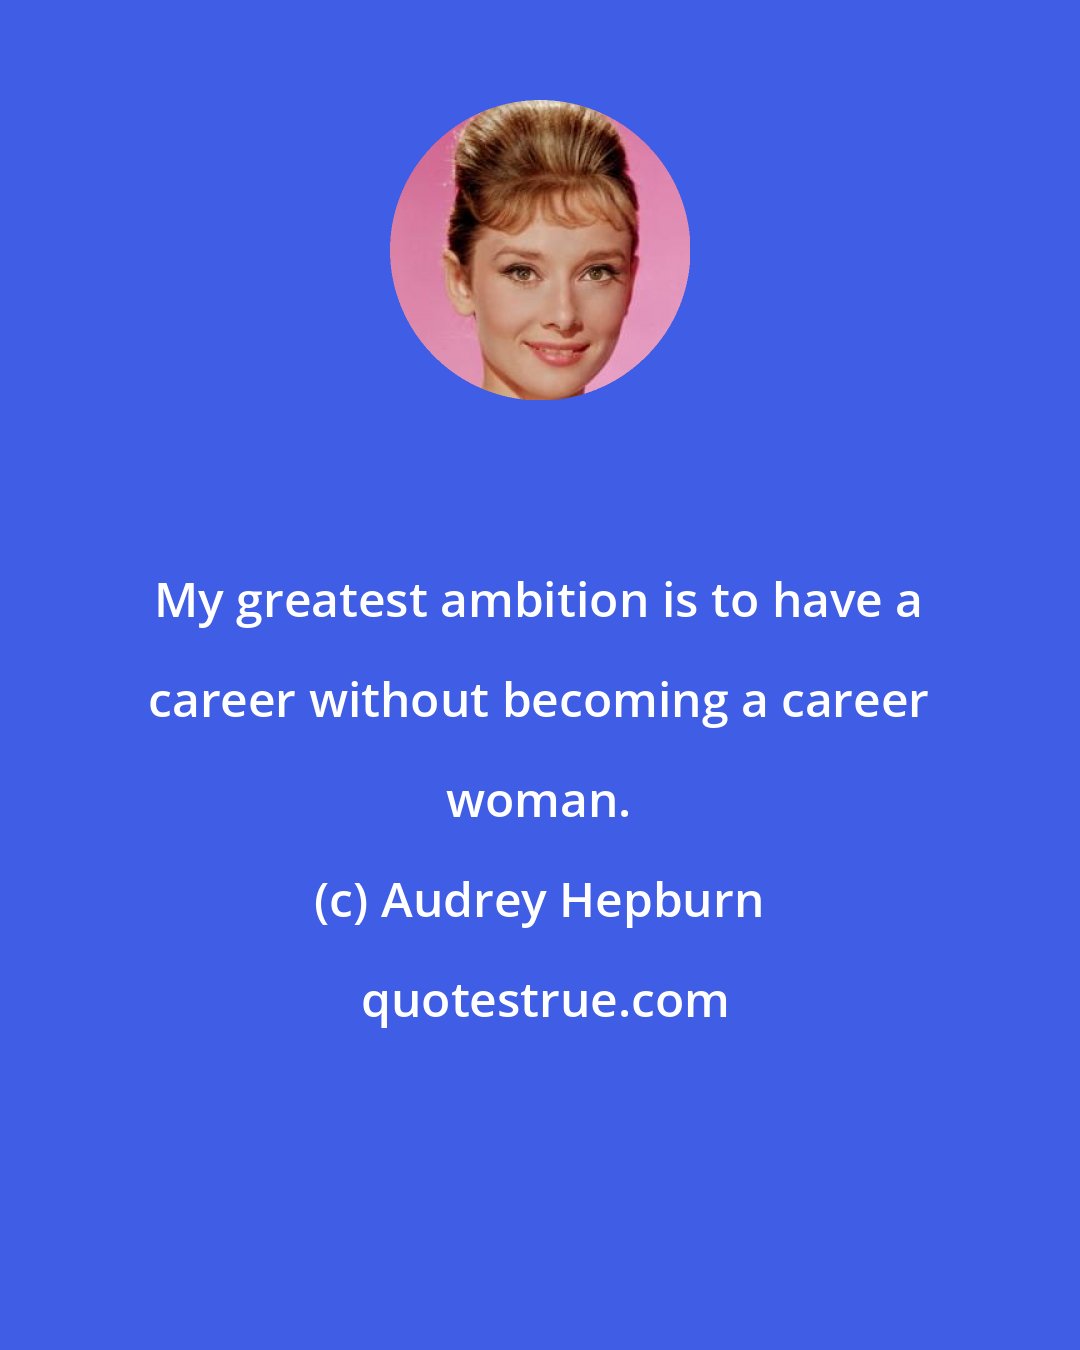 Audrey Hepburn: My greatest ambition is to have a career without becoming a career woman.